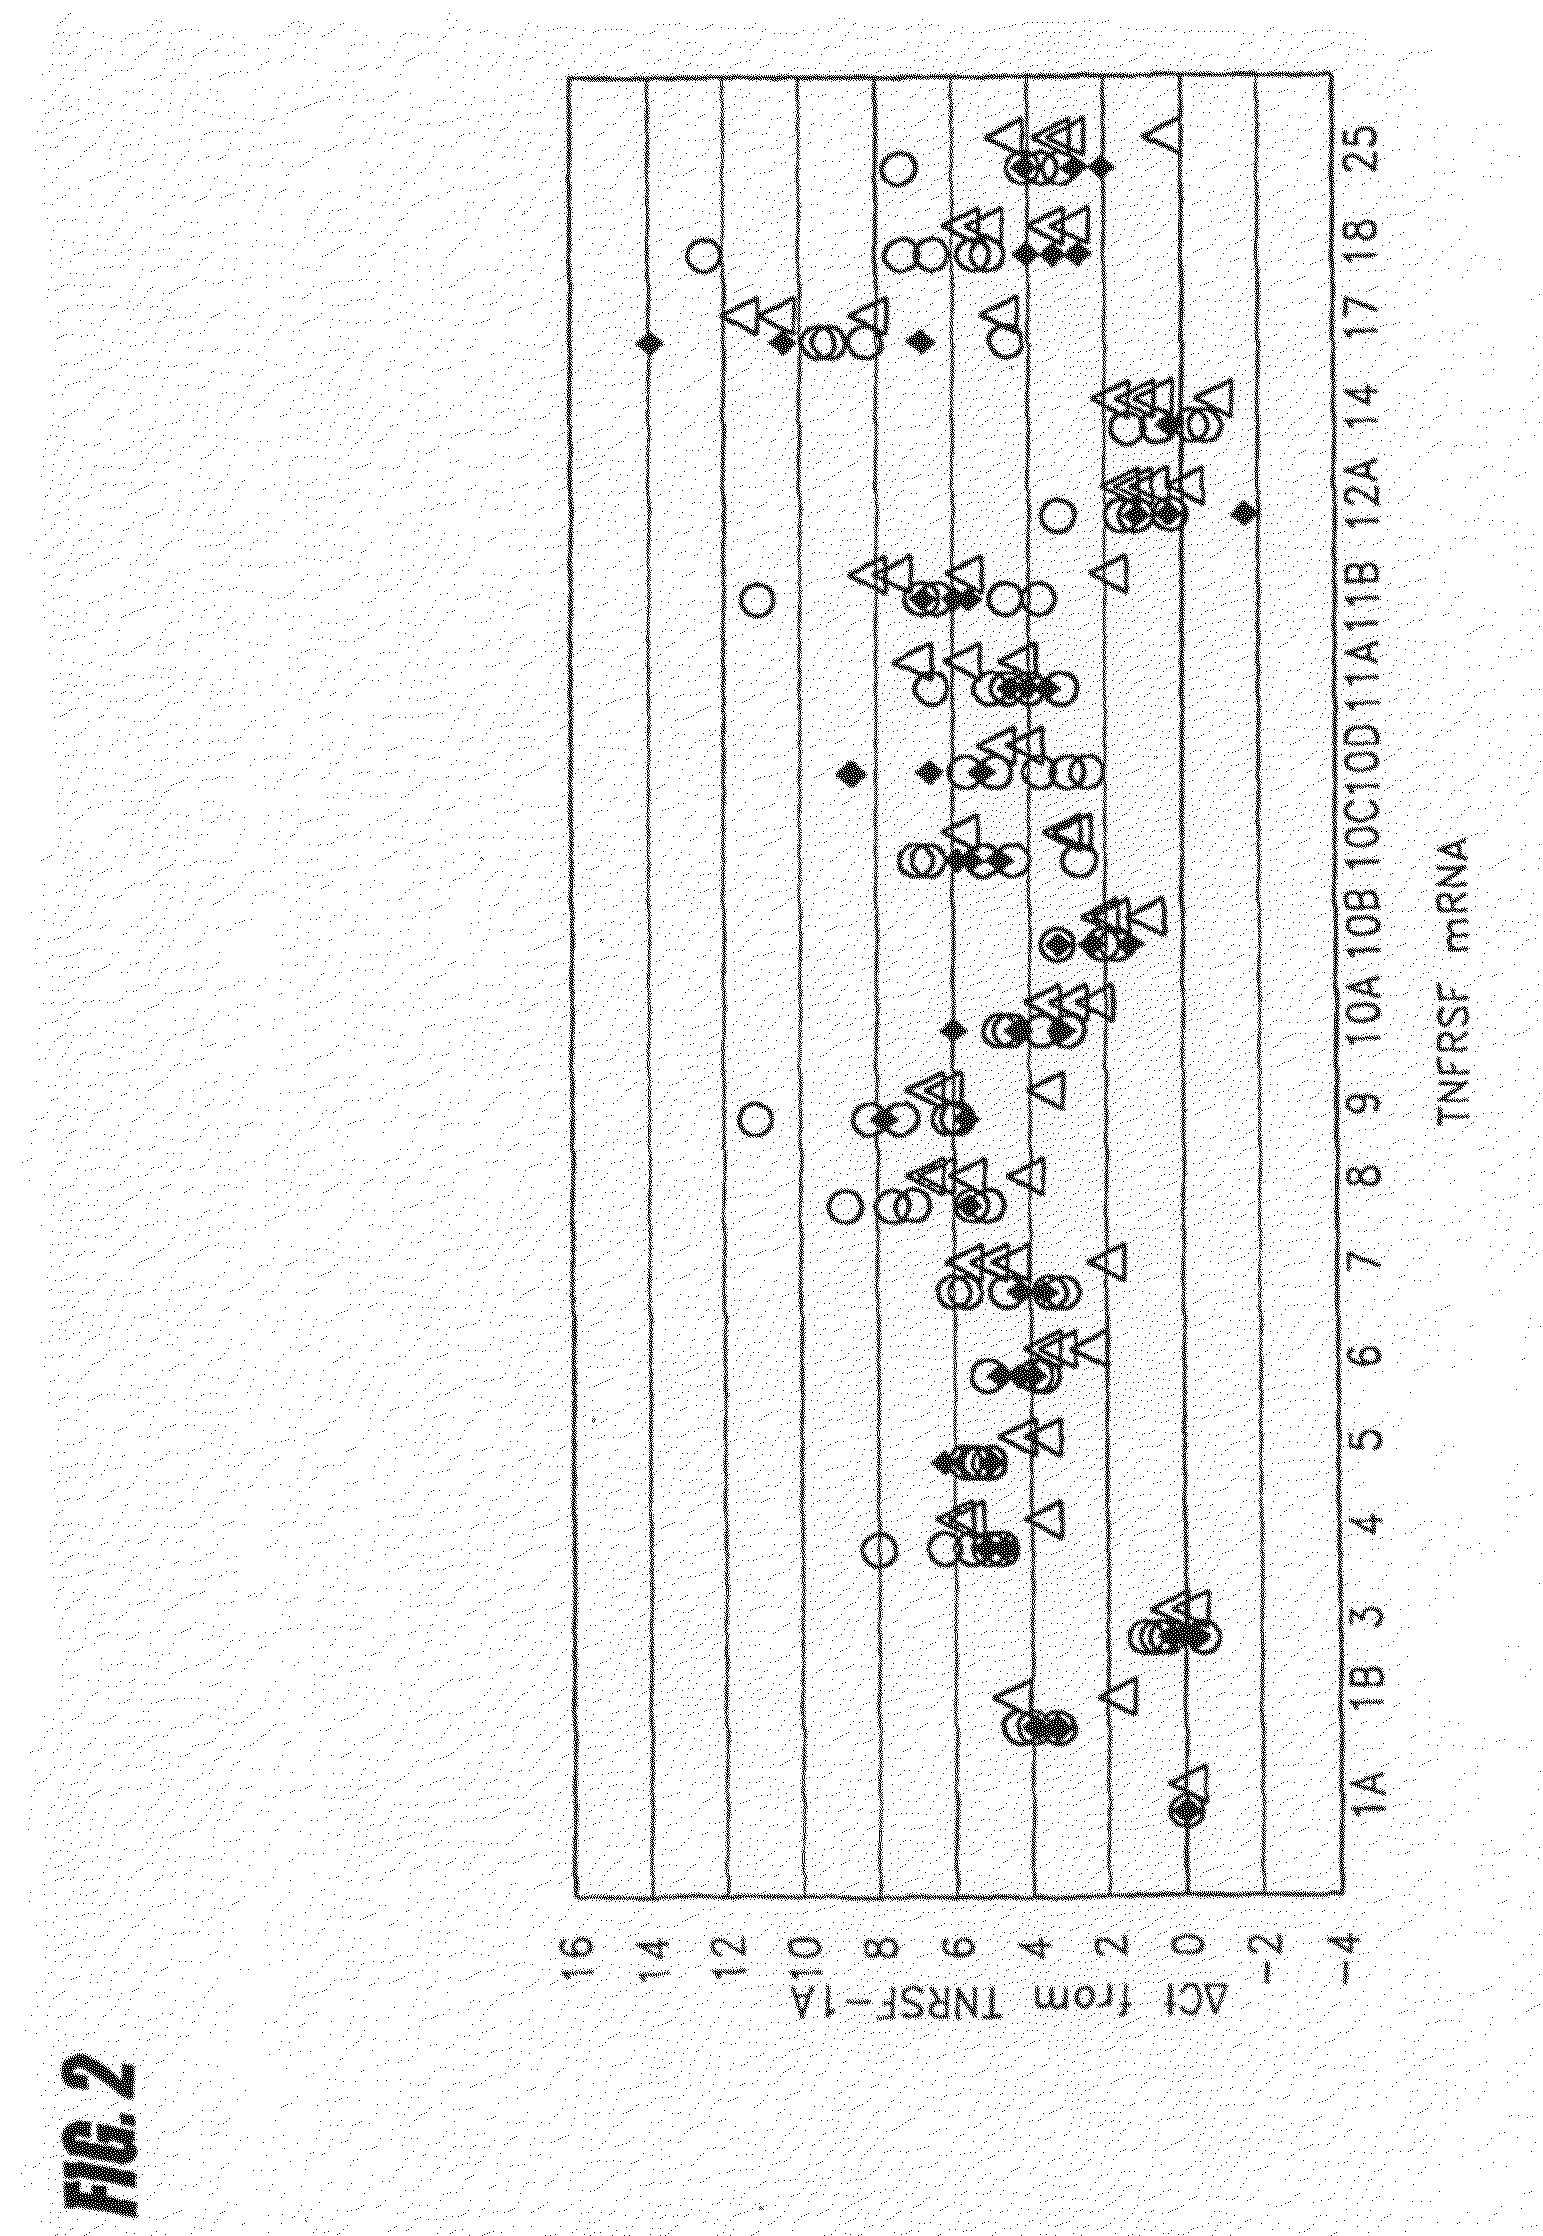 METHOD FOR PREDICTING IMMUNE RESPONSE TO NEOPLASTIC DISEASE BASED ON mRNA EXPRESSION PROFILE IN NEOPLASTIC CELLS AND STIMULATED LEUKOCYTES